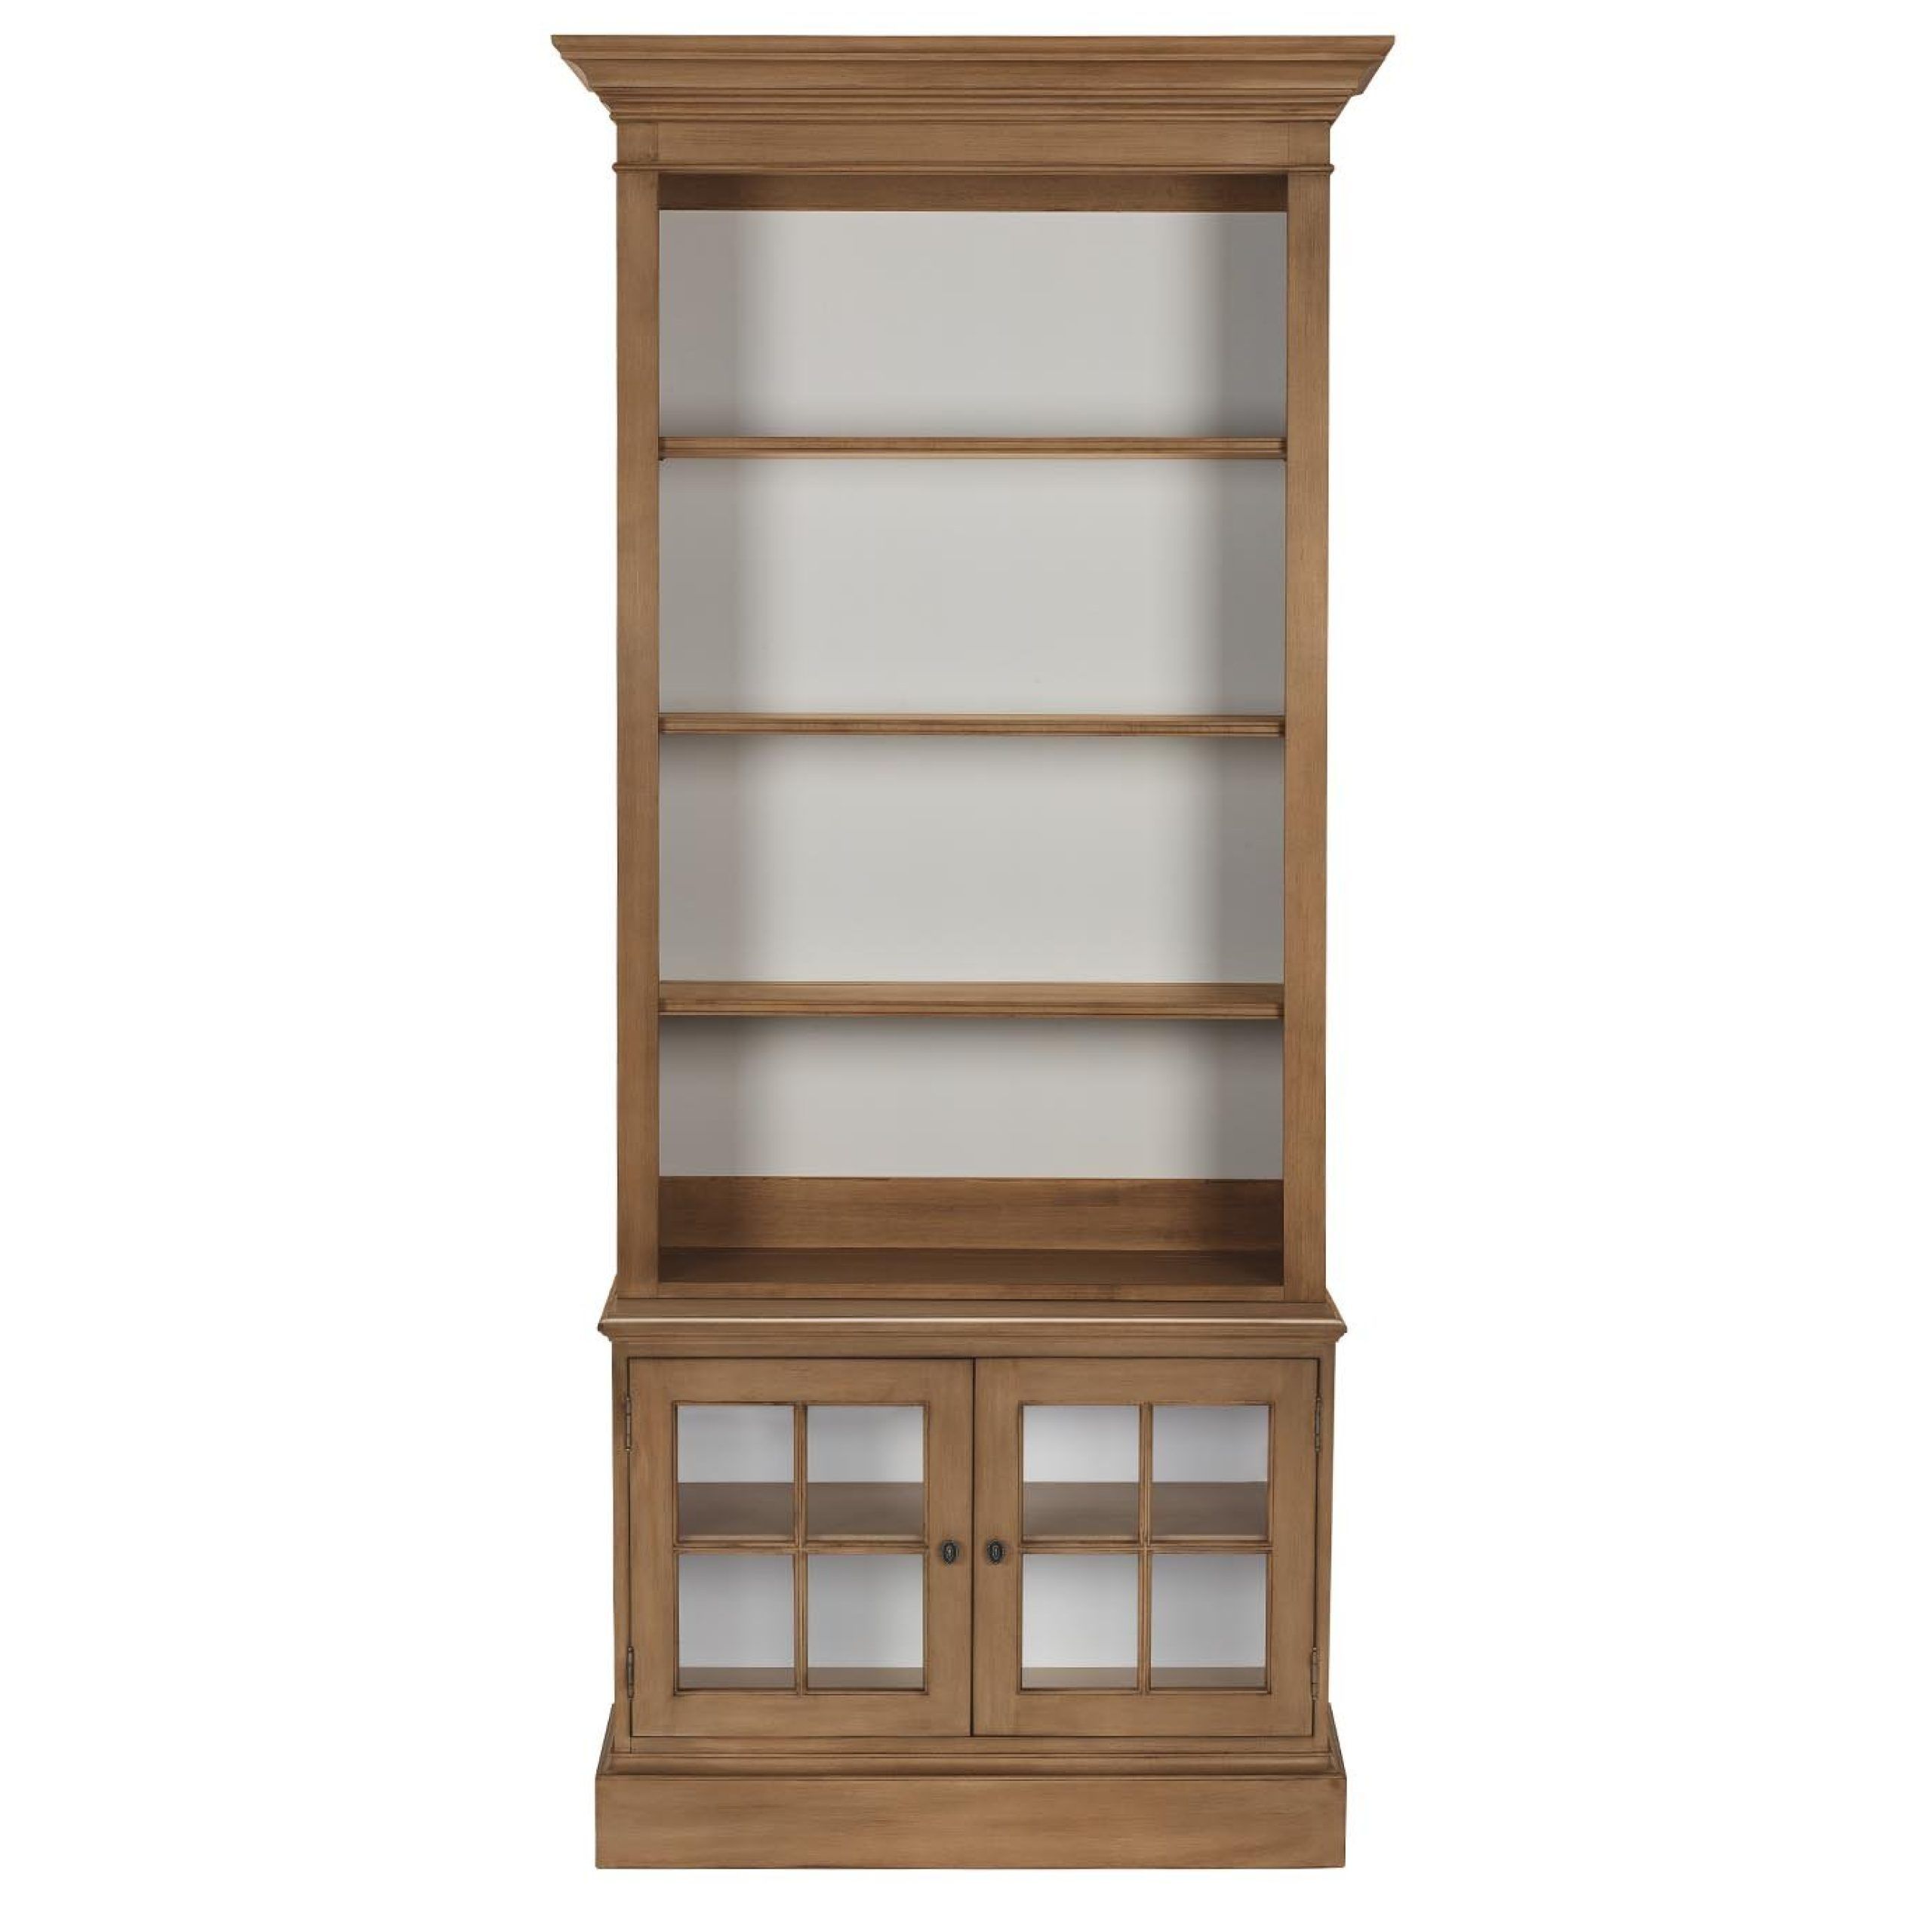 Villa Library Bookcase With Open Shelves | Ethan Allen Intended For Bookcases With Open Shelves (View 14 of 15)